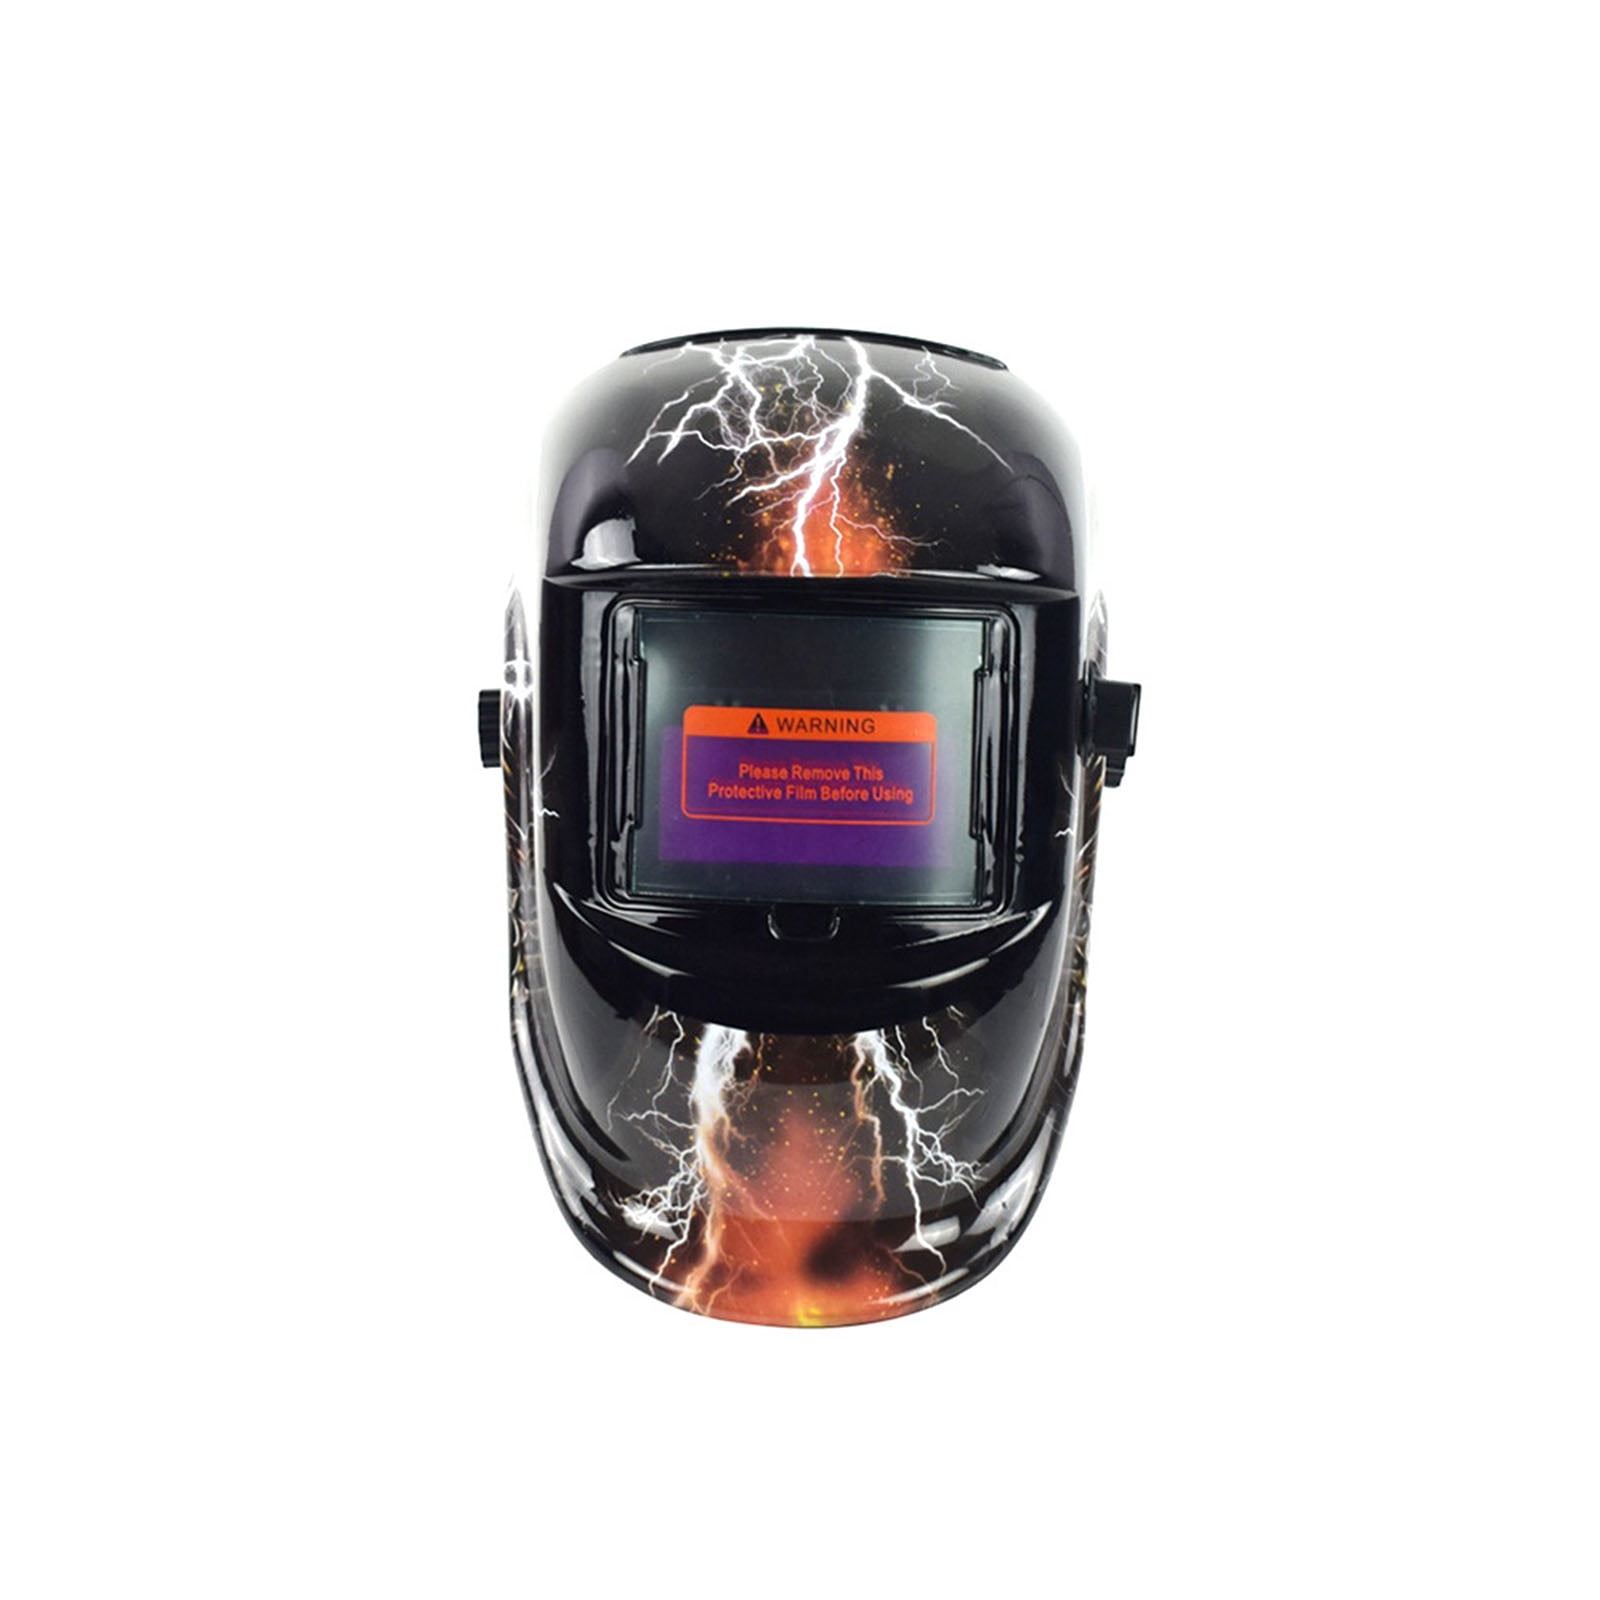 YanFeng Welding Helmet Solar Automatic Dimming Adjustable Flip Large Field of View Wear-Resistant Safe Efficient Lightweight and Durable Welder Mask